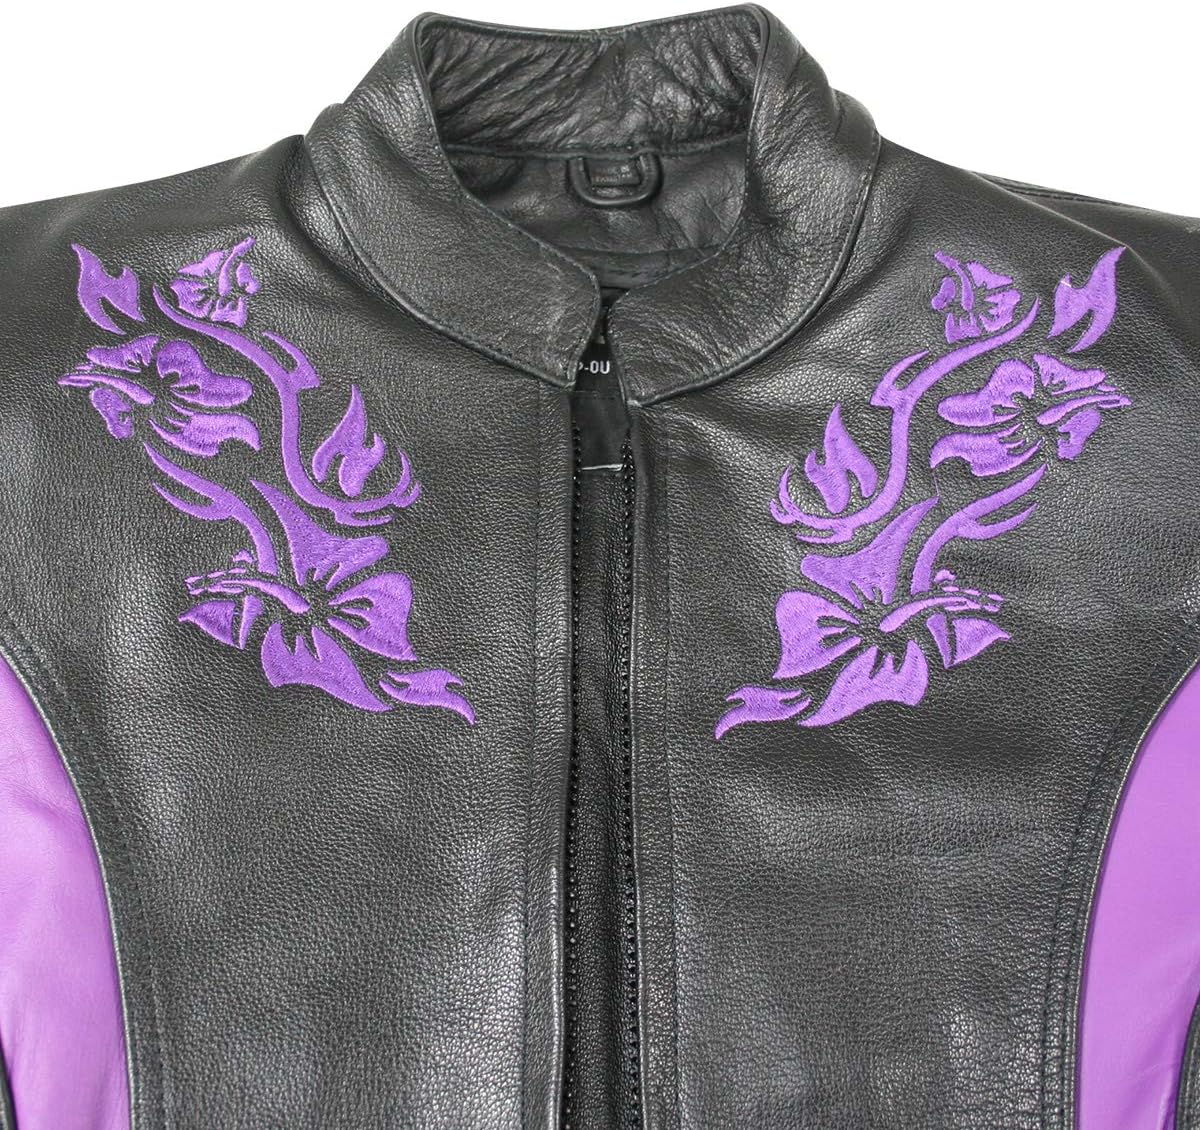 M Boss Motorcycle Apparel BOS22702 Ladies Black and Purple Mesh Racer Jacket with Full Armor 5X-Large